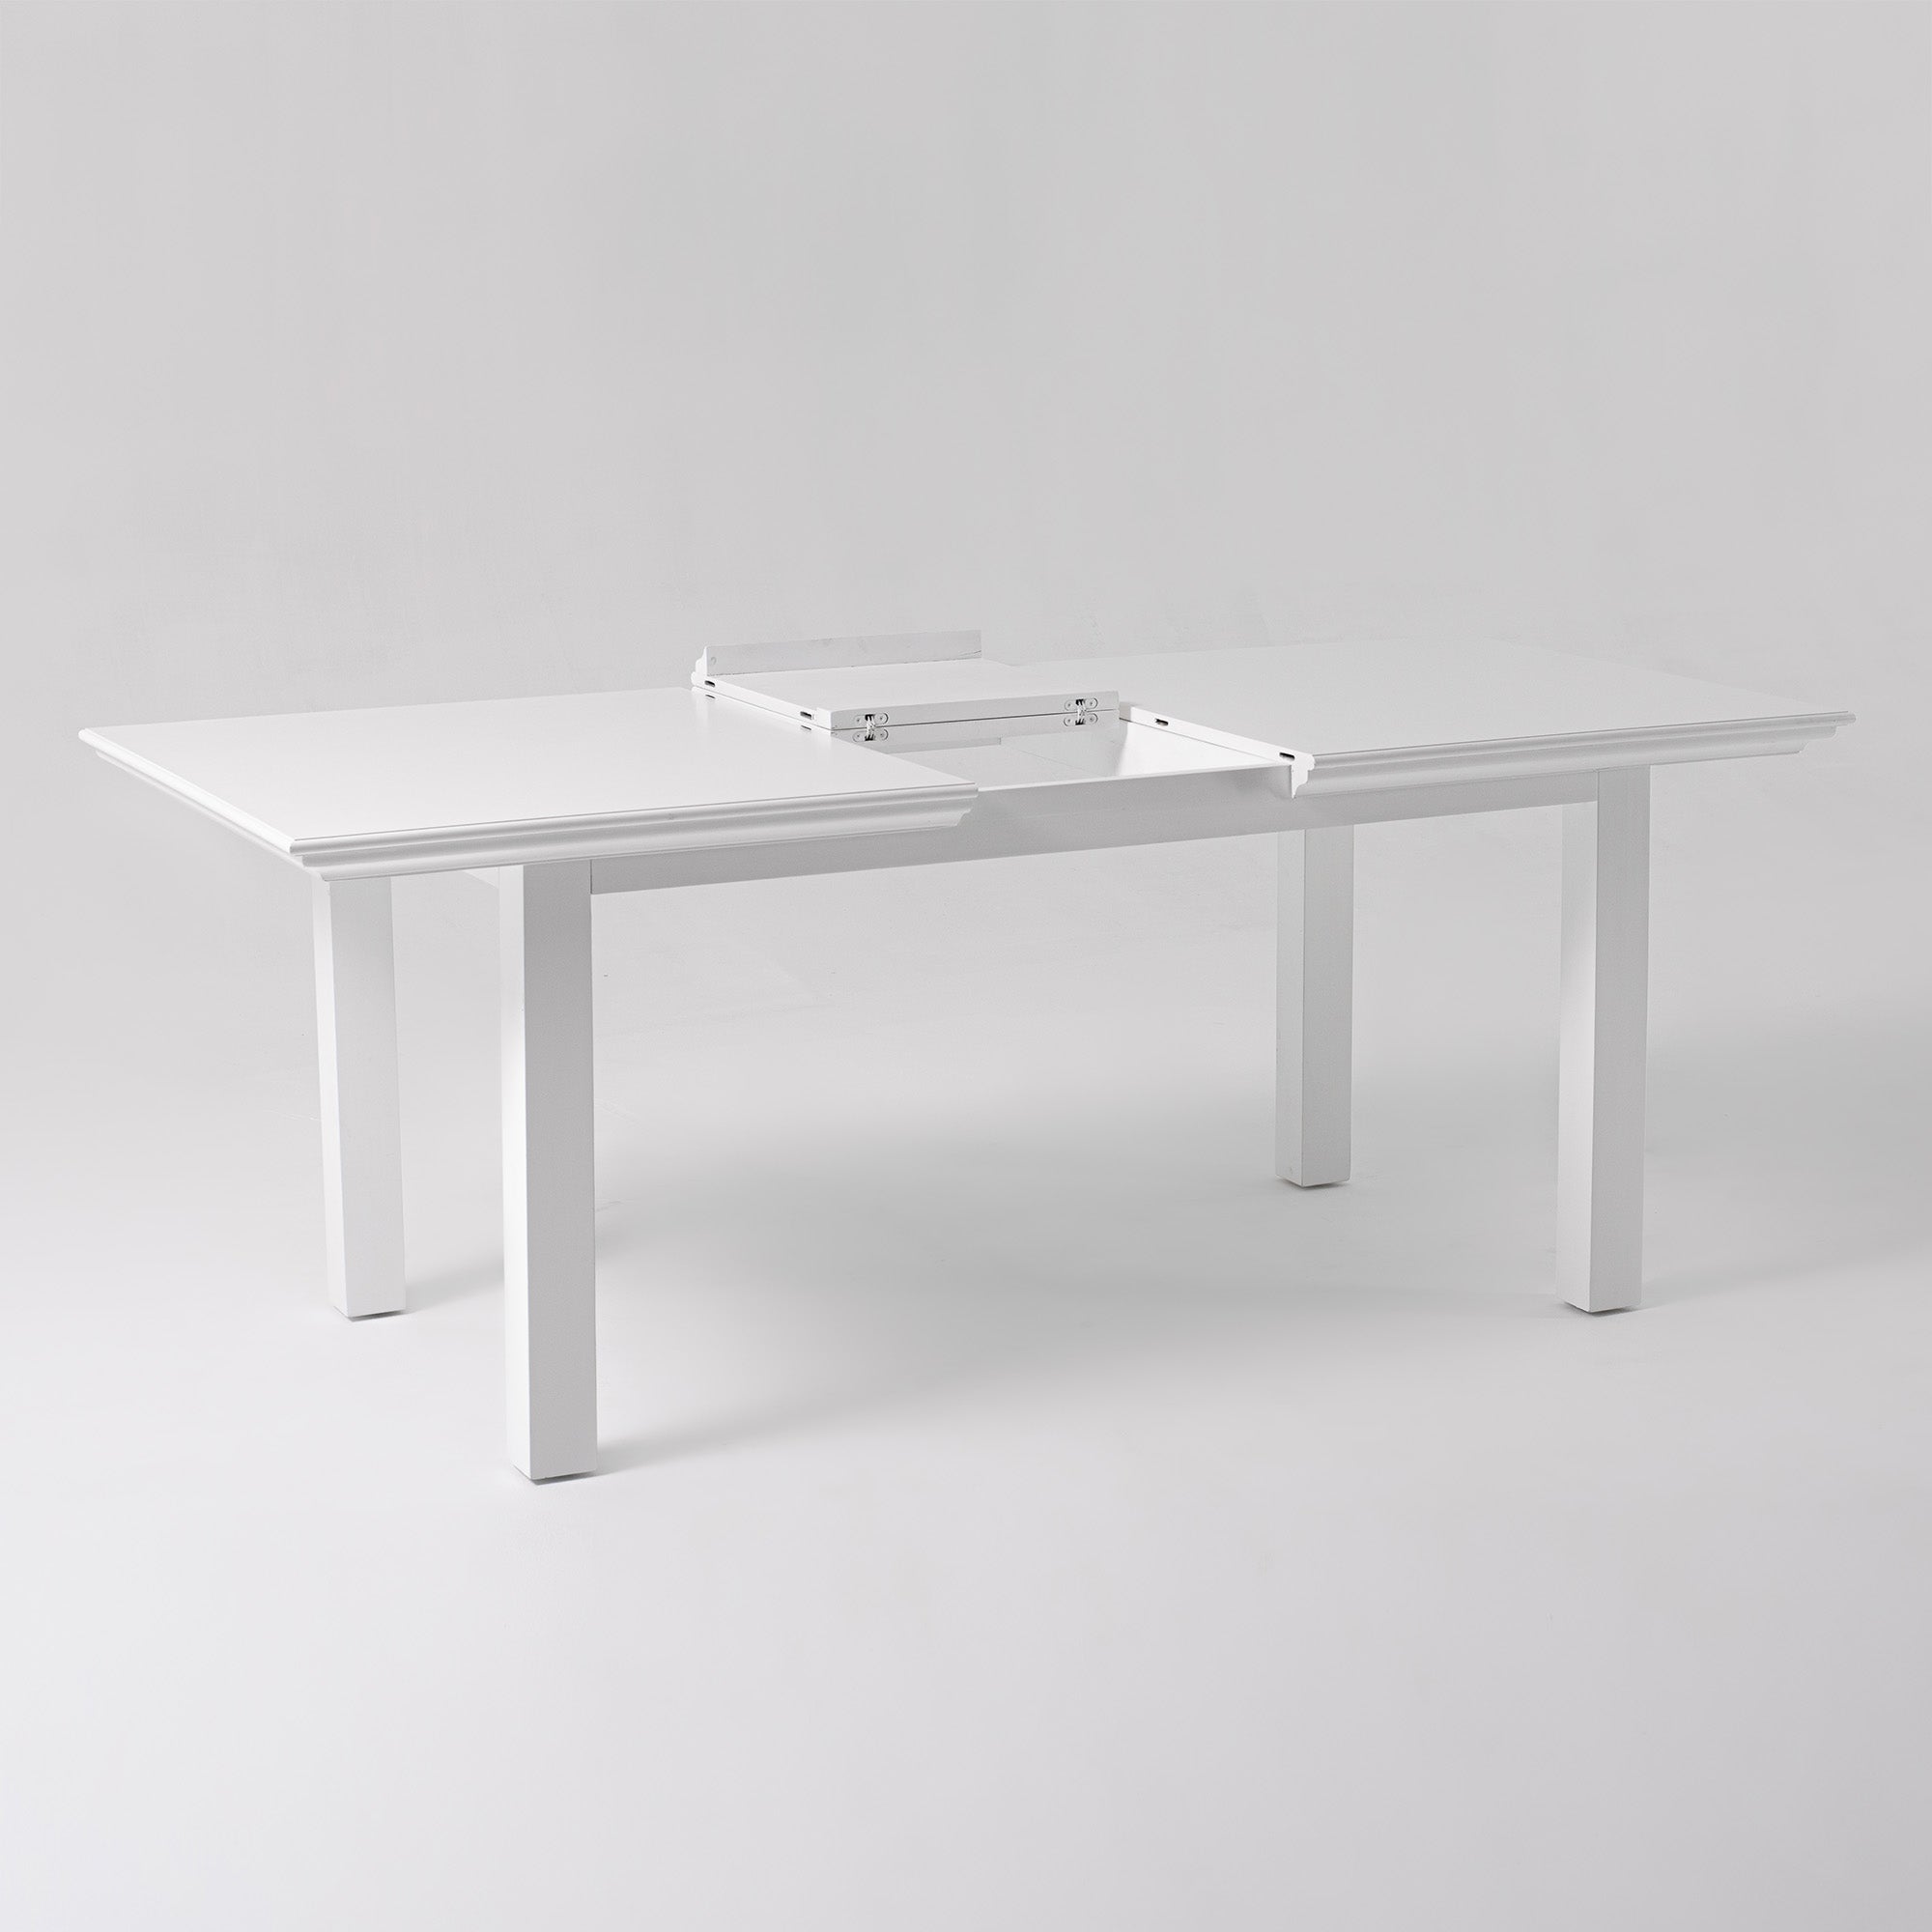 Halifax Coastal White Dining Extension Table